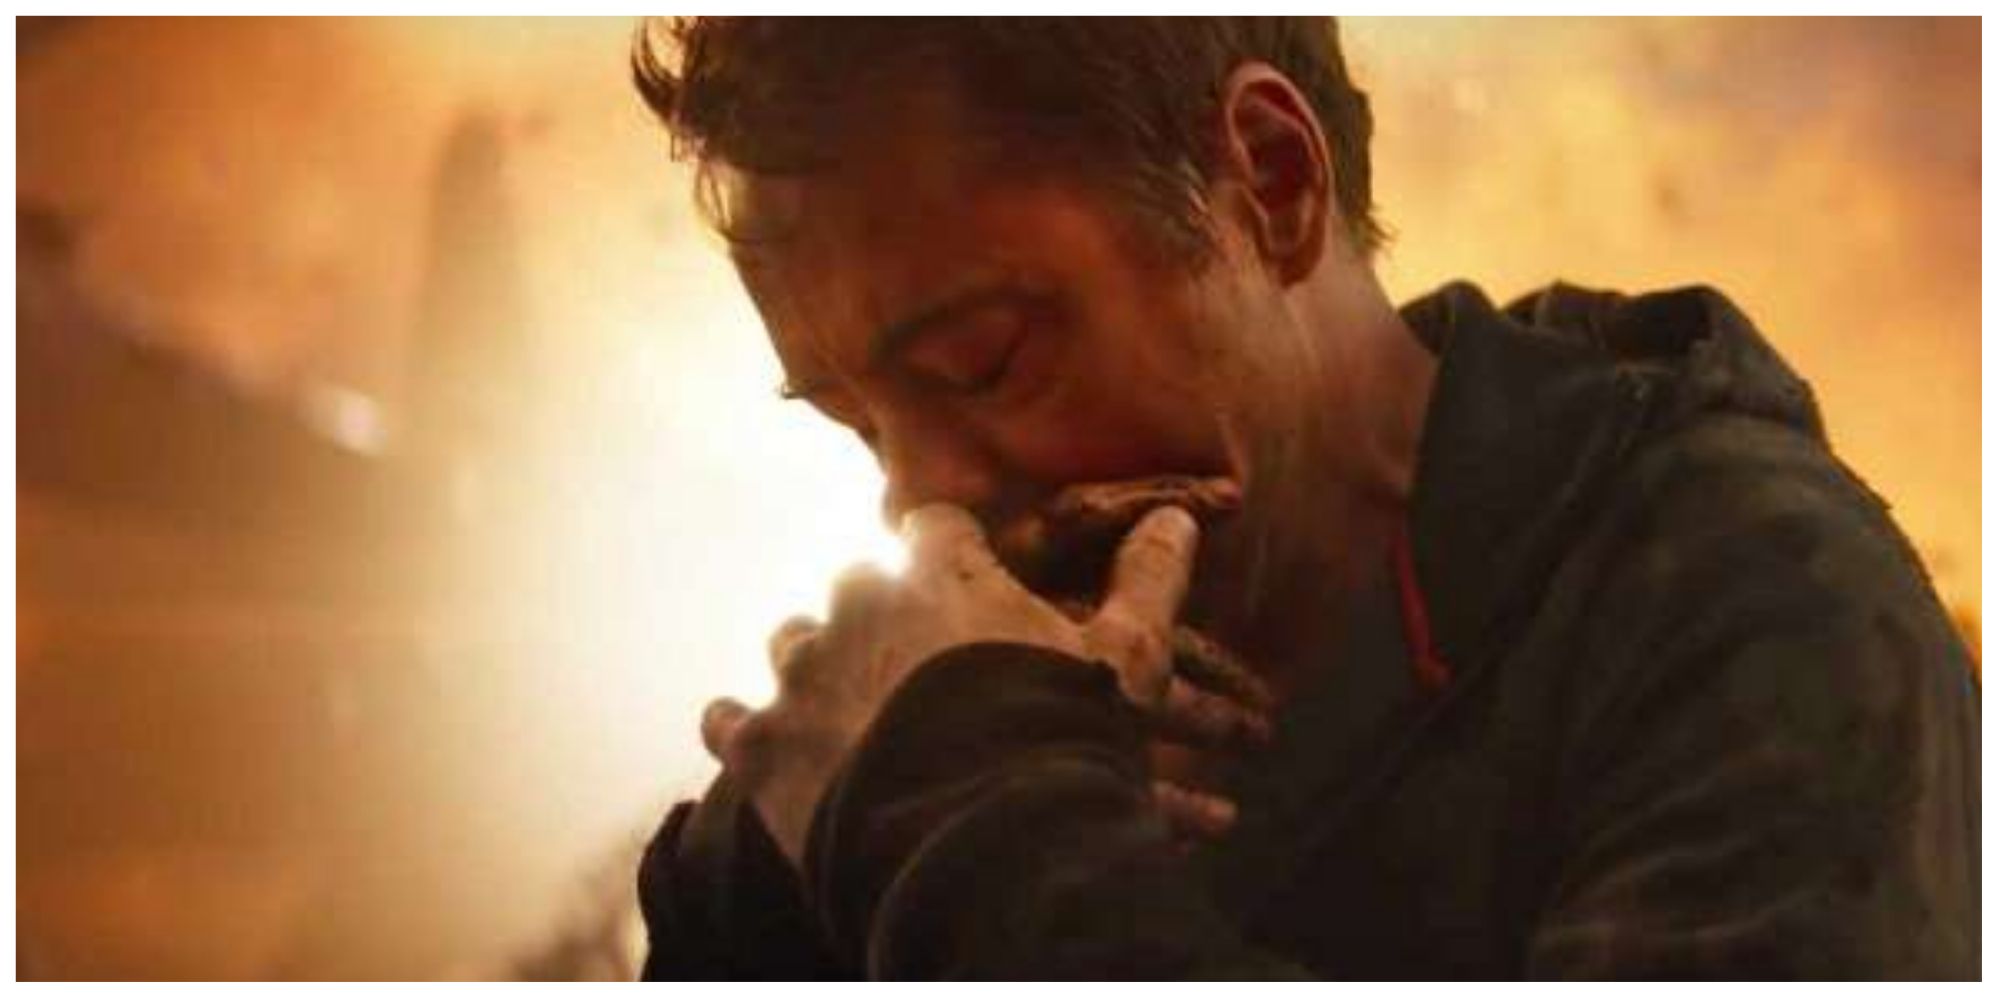 Tony Stark dealing with Peter's death